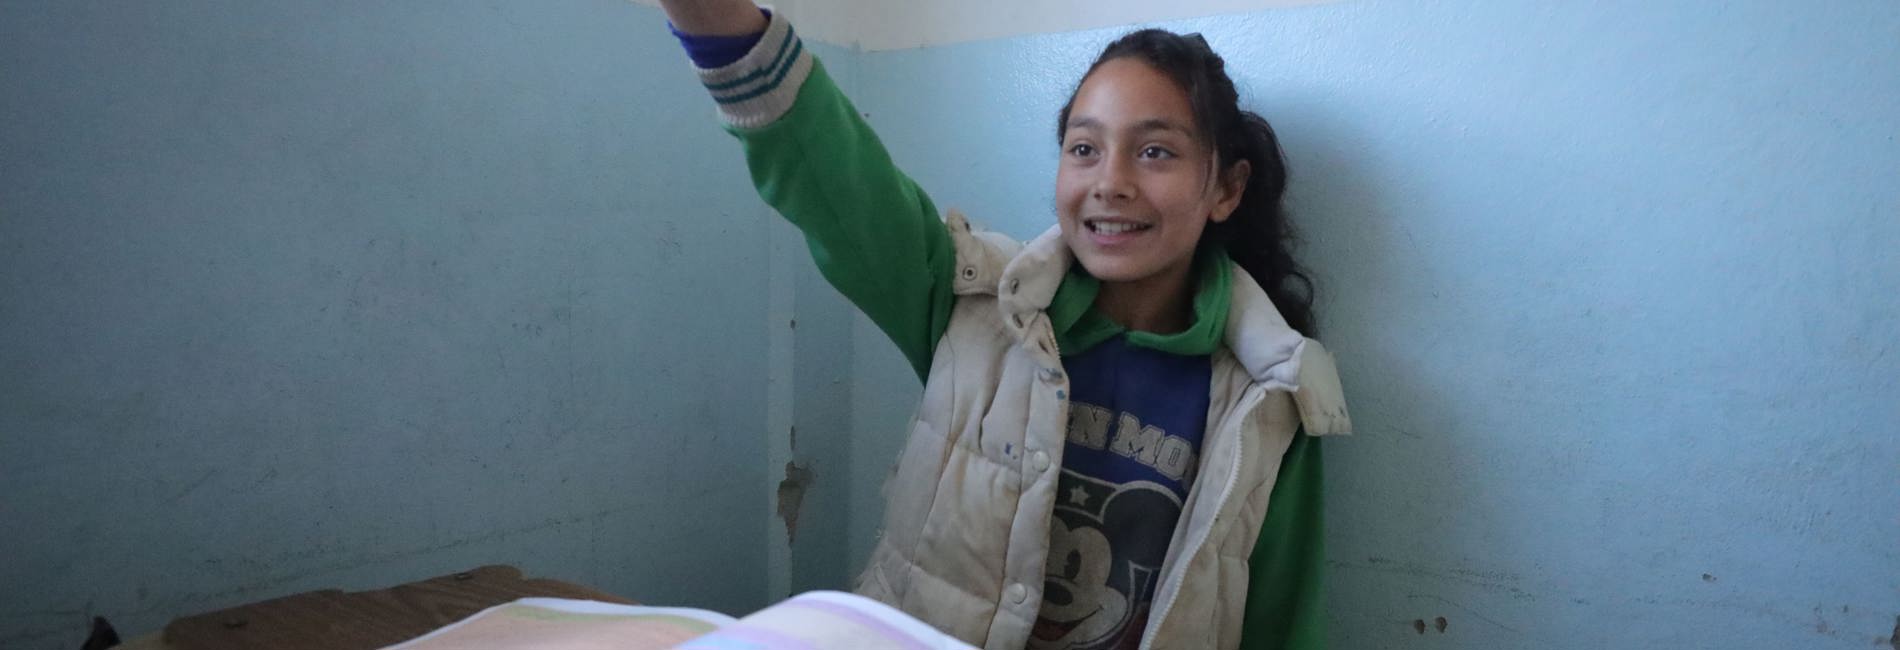 Nour attends a primary public school rehabilitated by UNHCR in Syria.